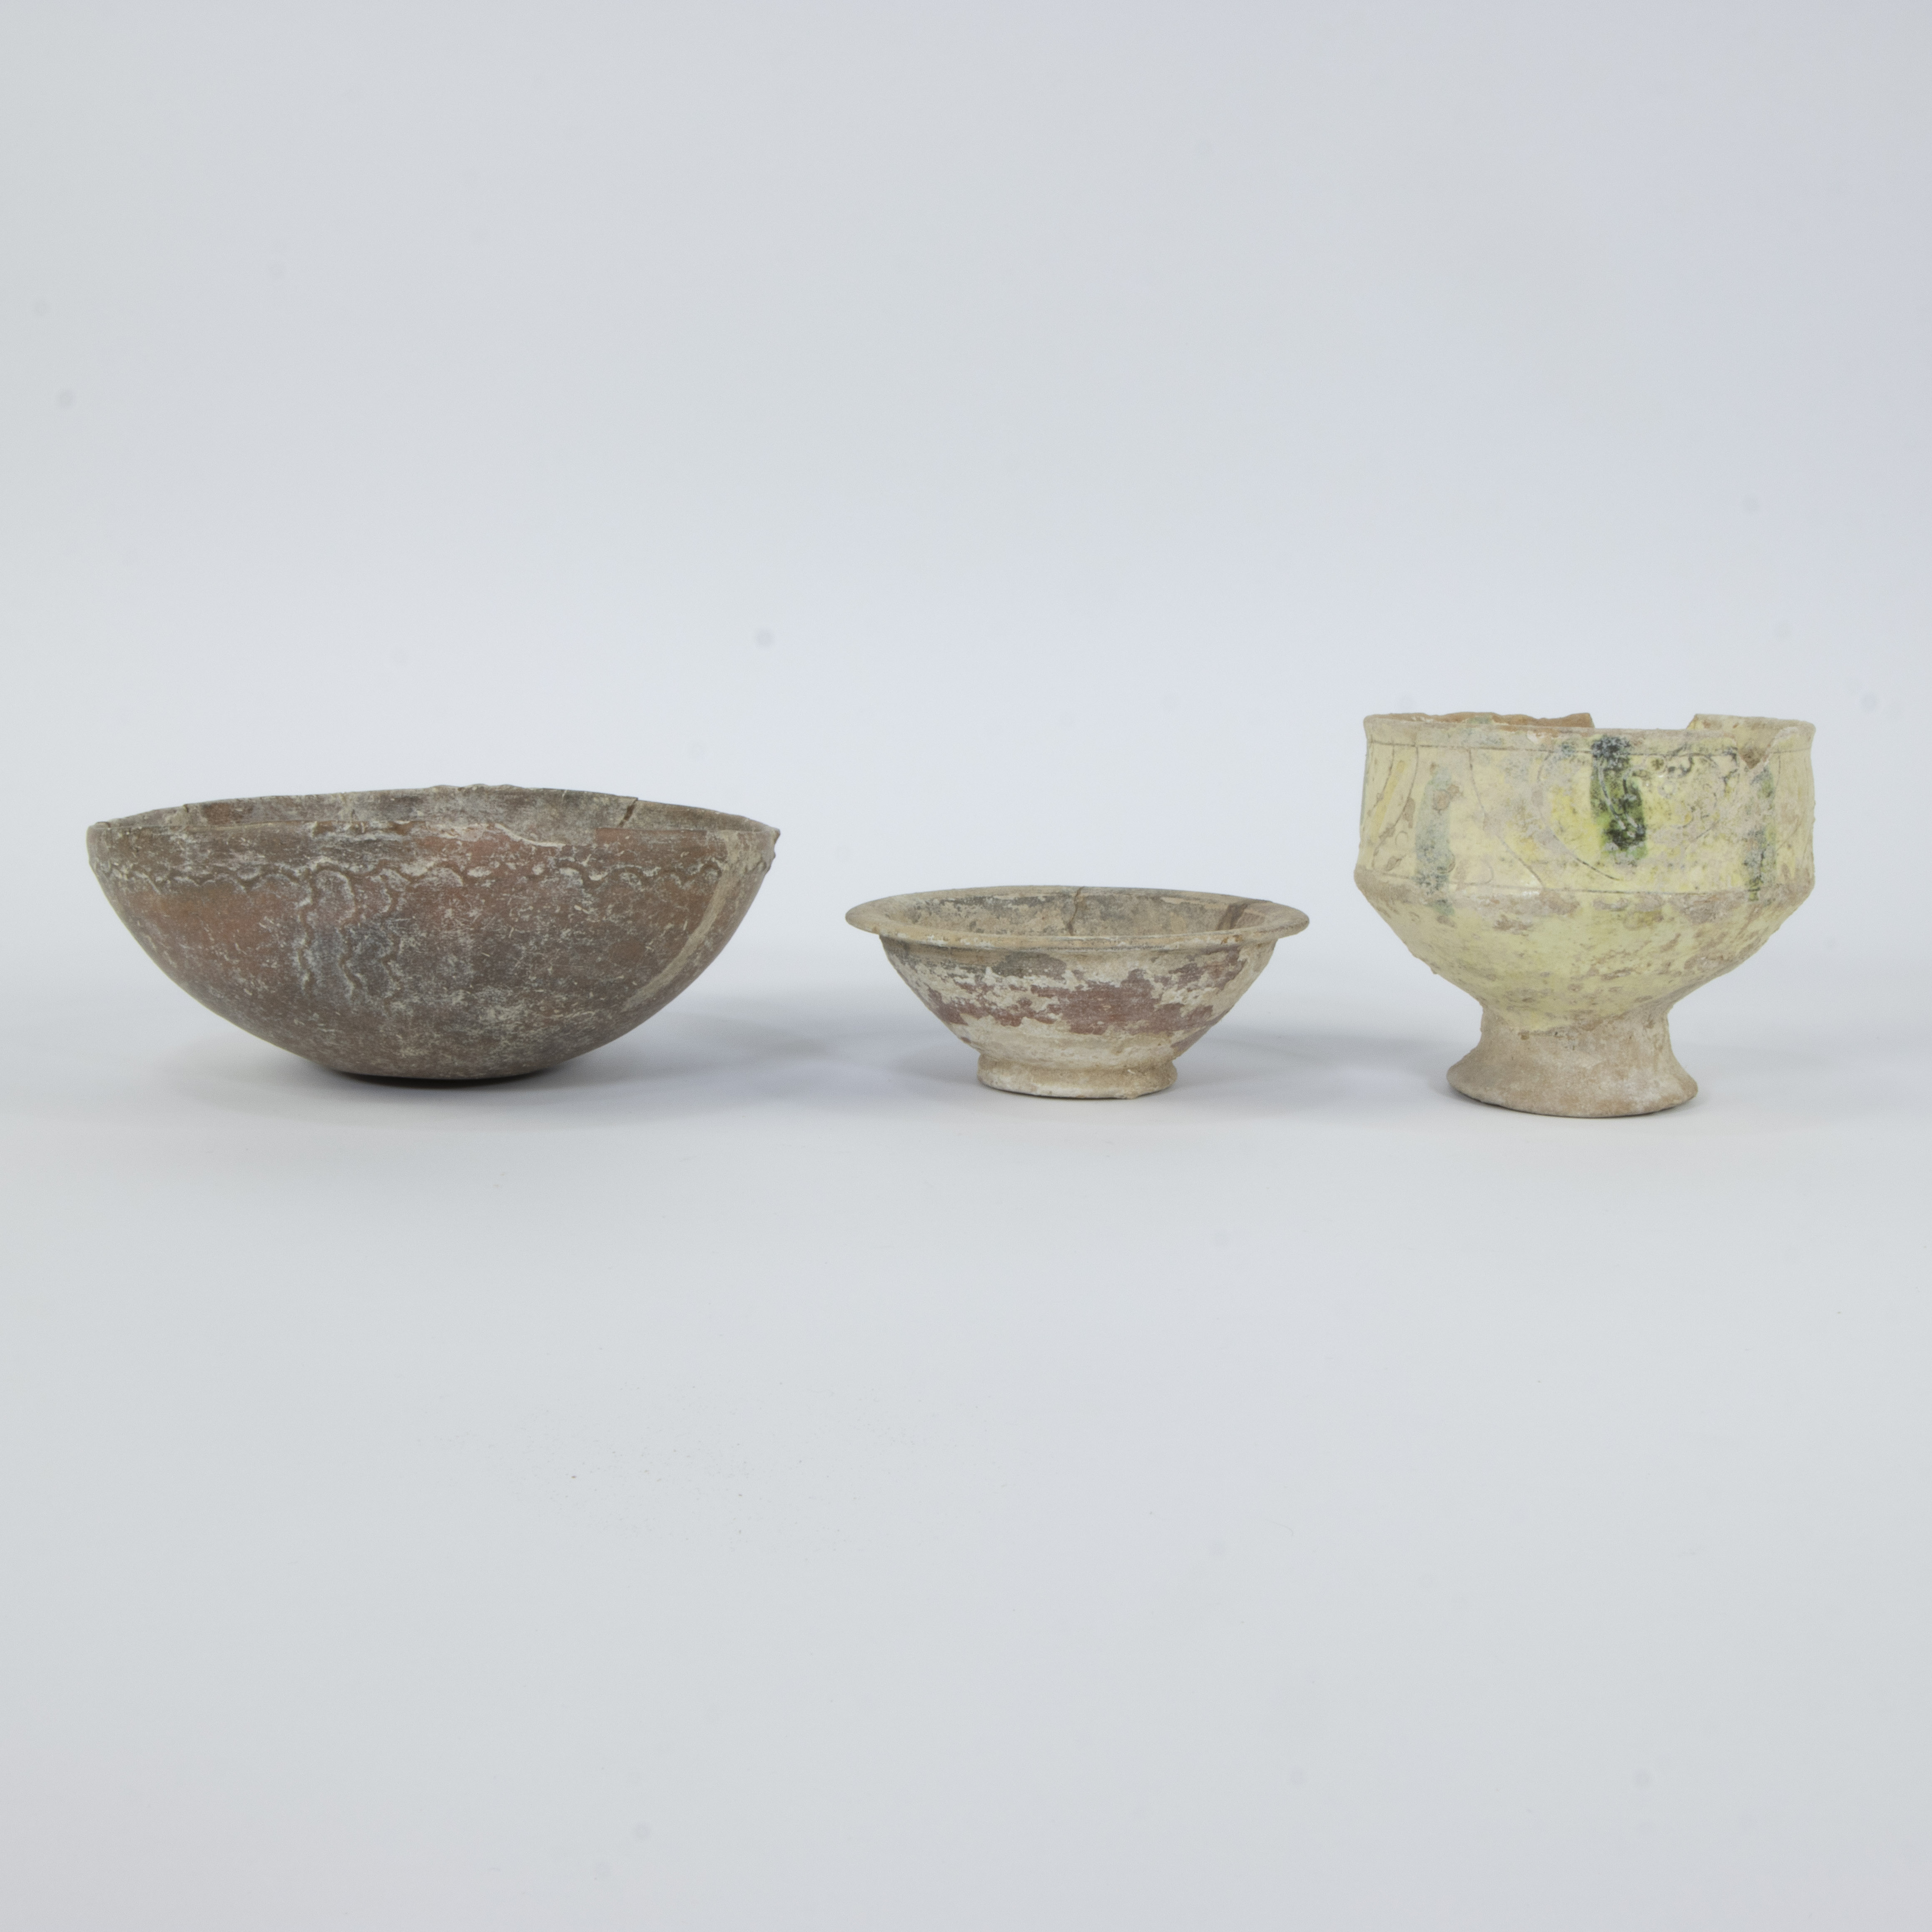 Pottery from ancient Greece, 2 bowls and a drinking cup - Image 2 of 5